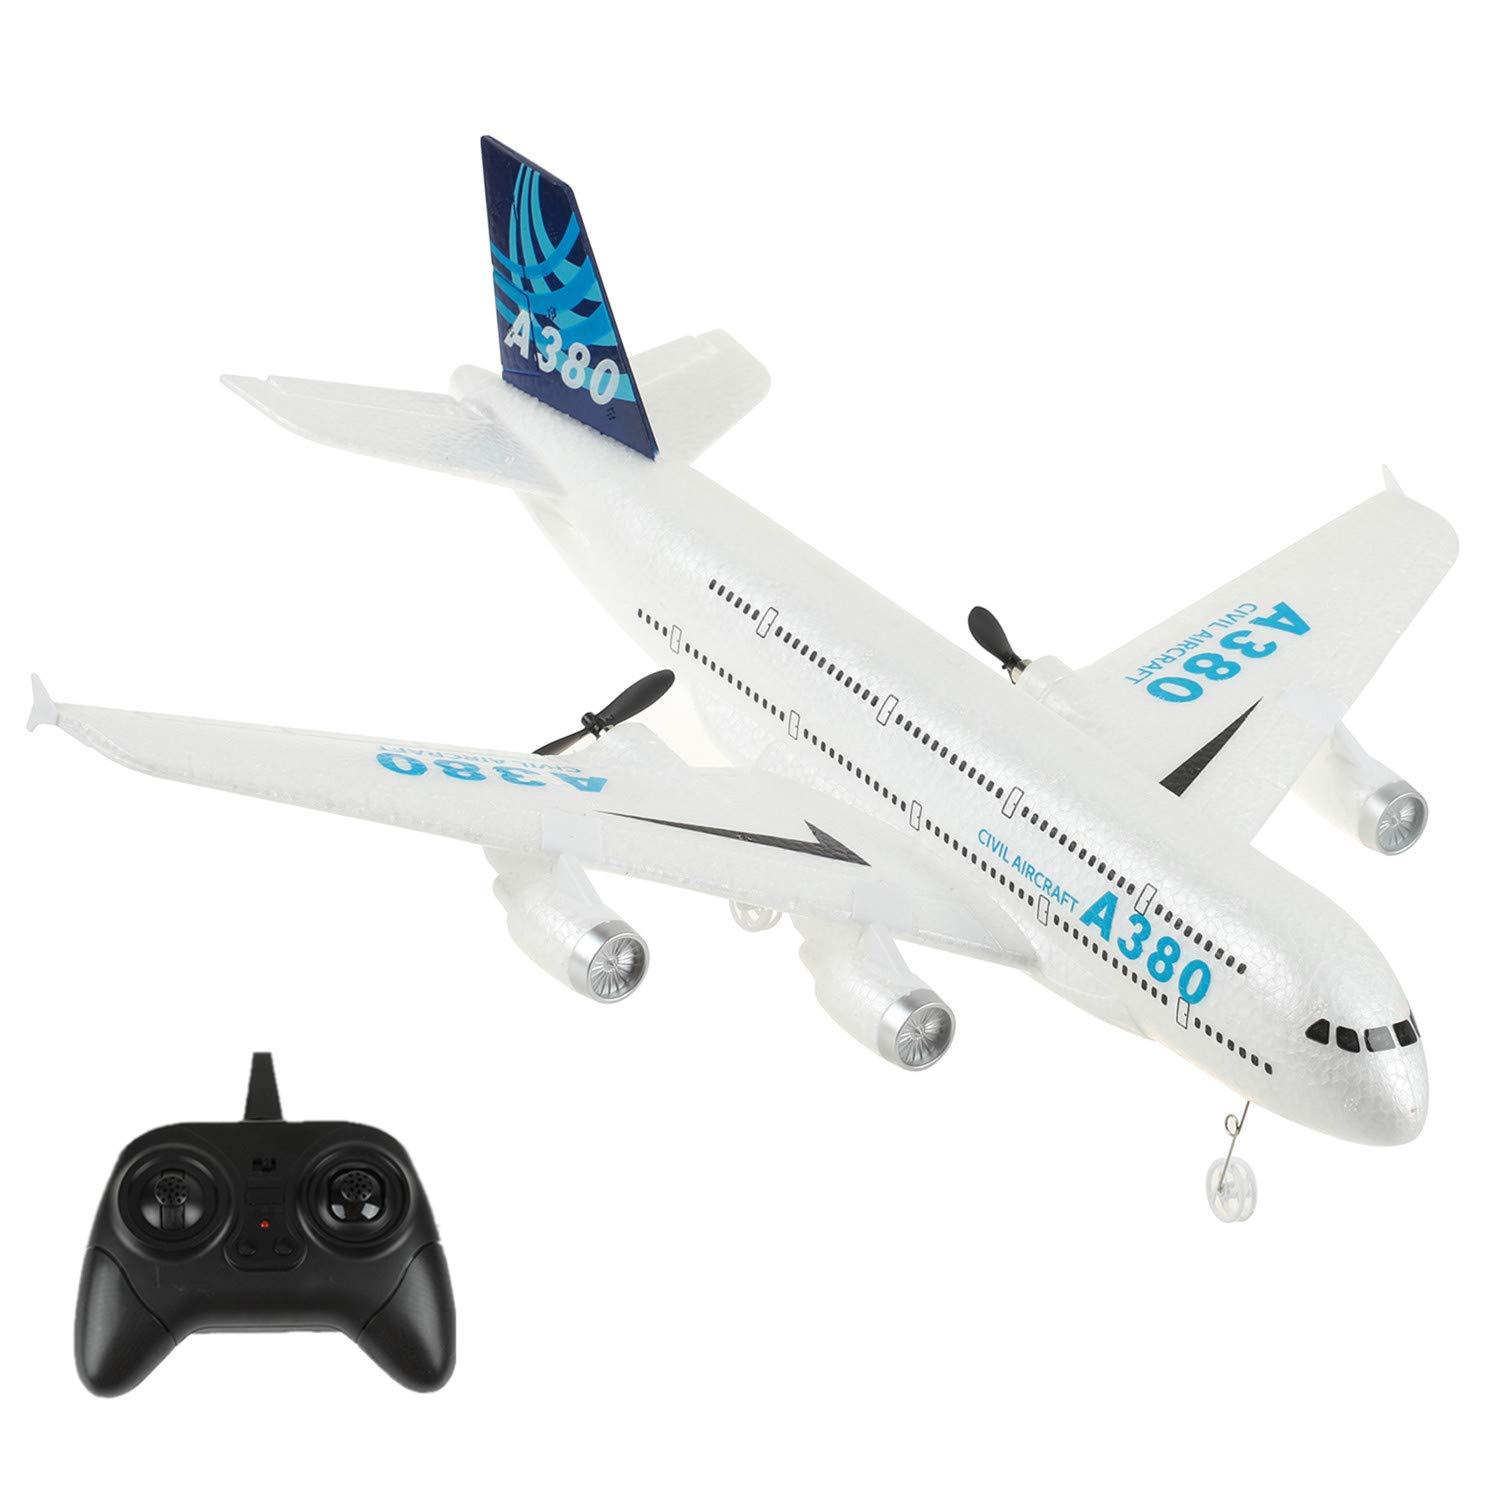 Indestructible Remote Control Airplane:  Factors to Consider When Buying an Indestructible RC Airplane